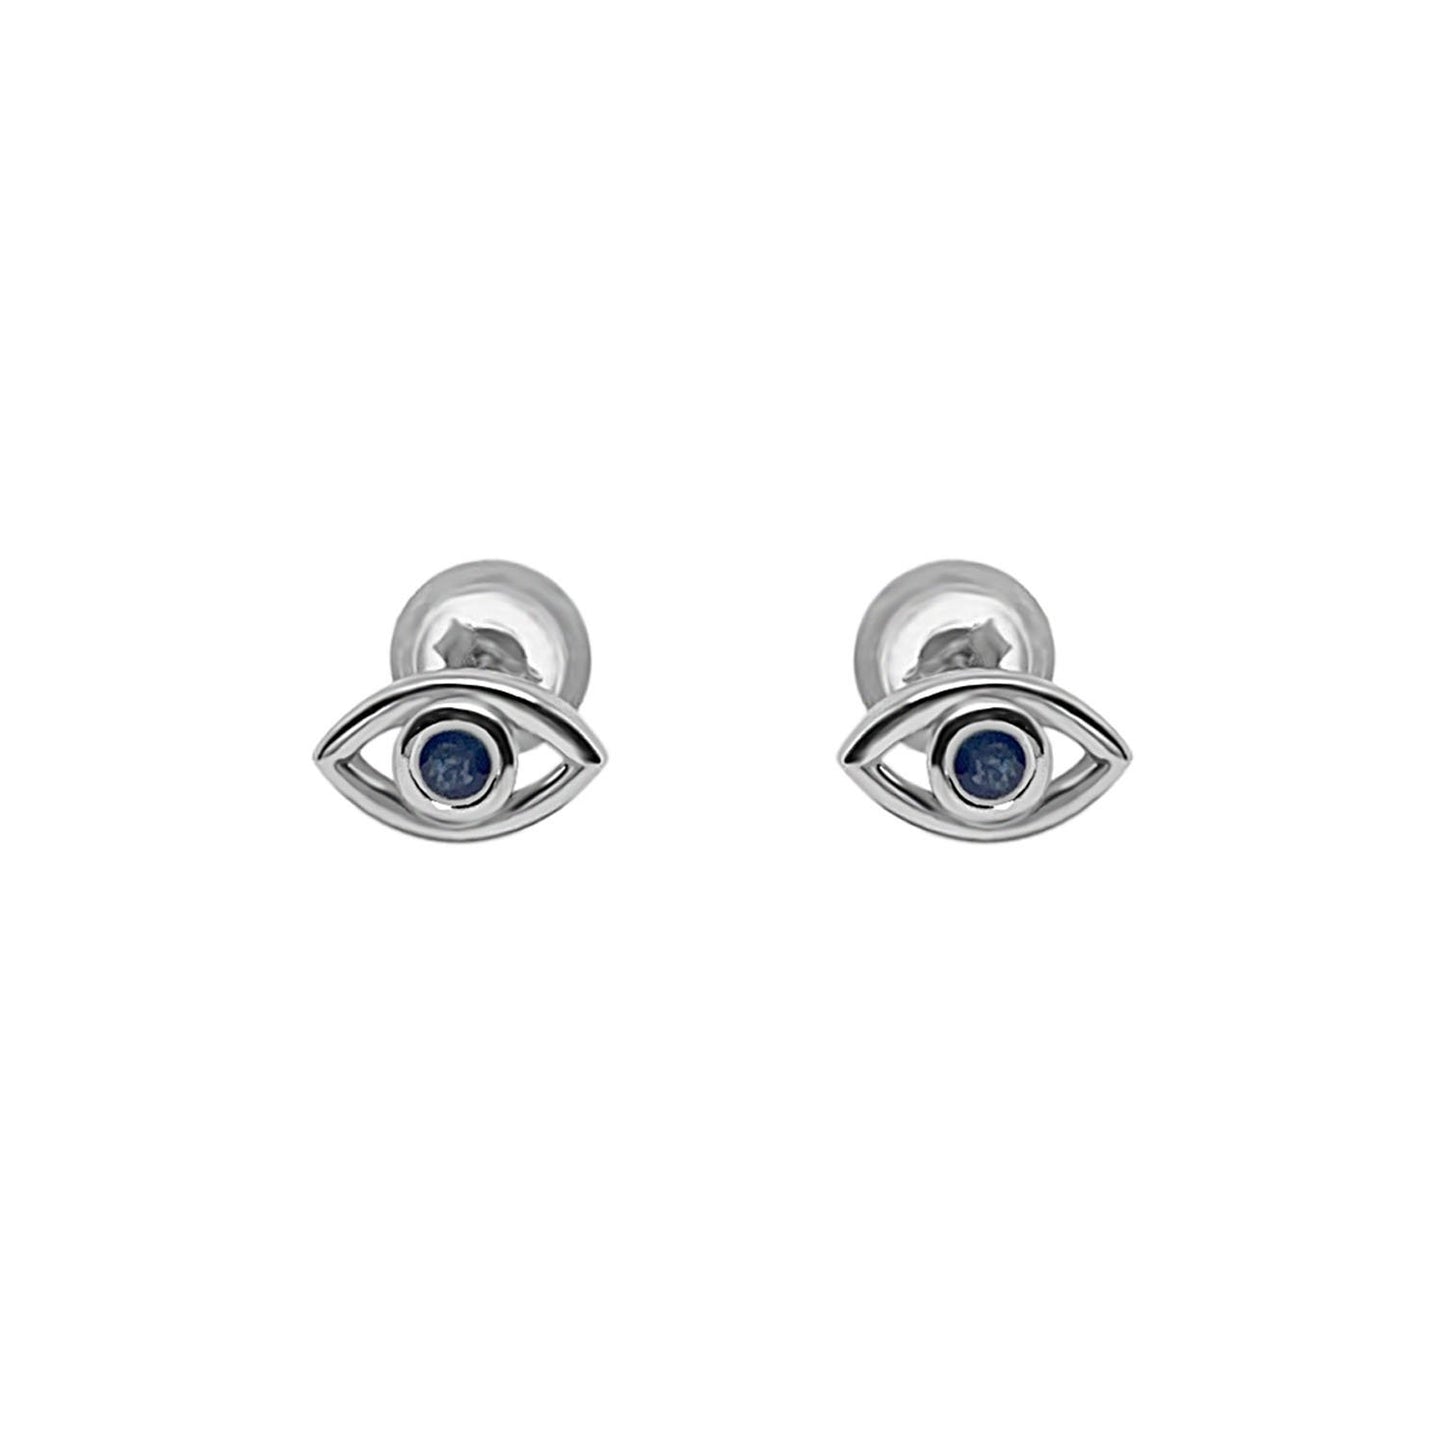 eye stud earrings blue sapphire stone sterling silver classic style kemmi collection